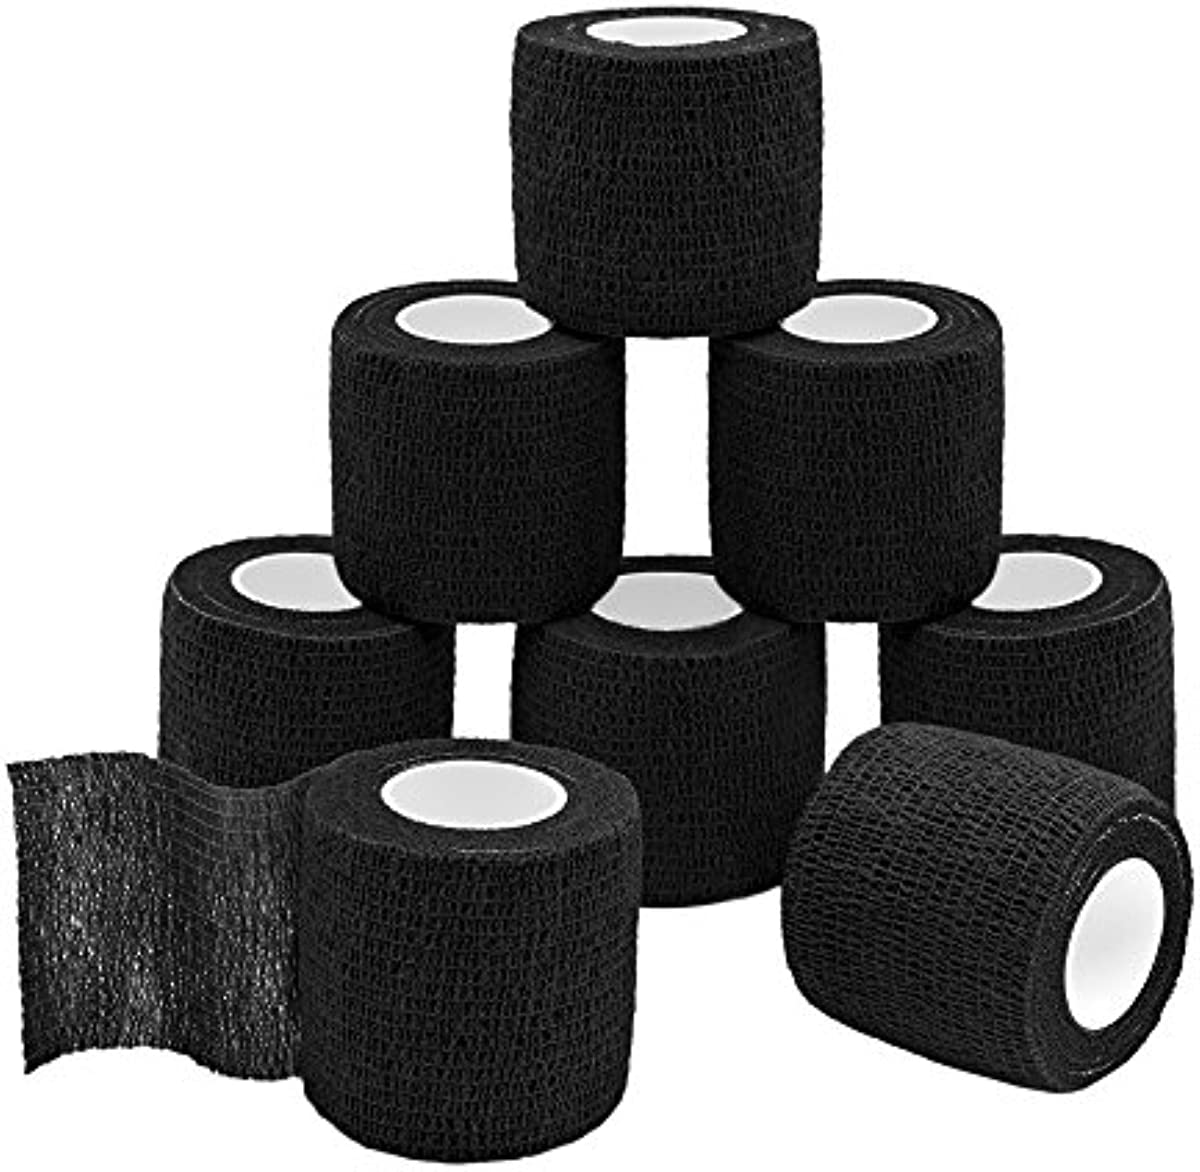 GooGou Self Adherent Wrap Bandages Self Adhering Cohesive Tape Elastic Athletic Sports Tape for Sports Sprain Swelling and Soreness on Wrist and Ankle 8PCS 2 in X 14.7 ft (Black)